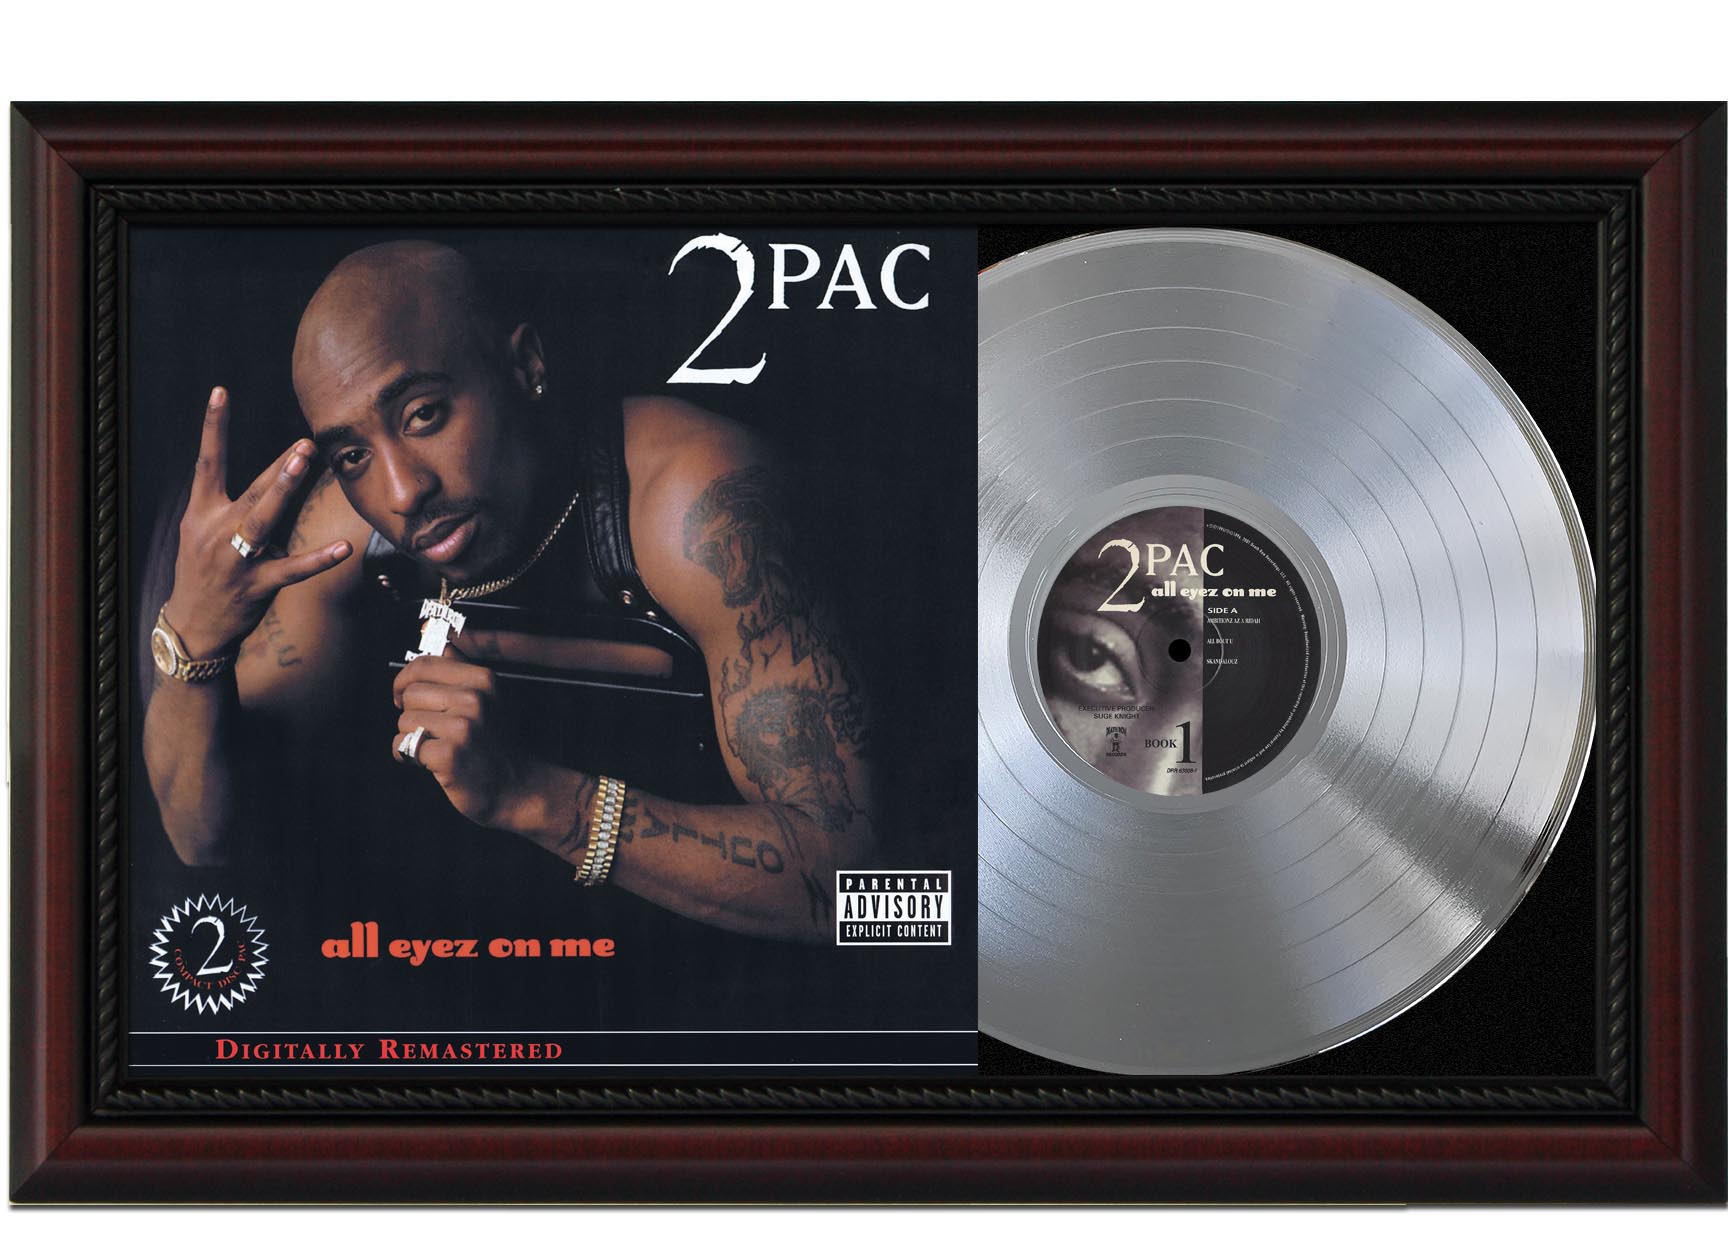 Hindre Furnace tyktflydende 2Pac - All Eyez On Me Cherry Wood Platinum LP Record Sleeve Display M4 -  Gold Record Outlet Album and Disc Collectible Memorabilia